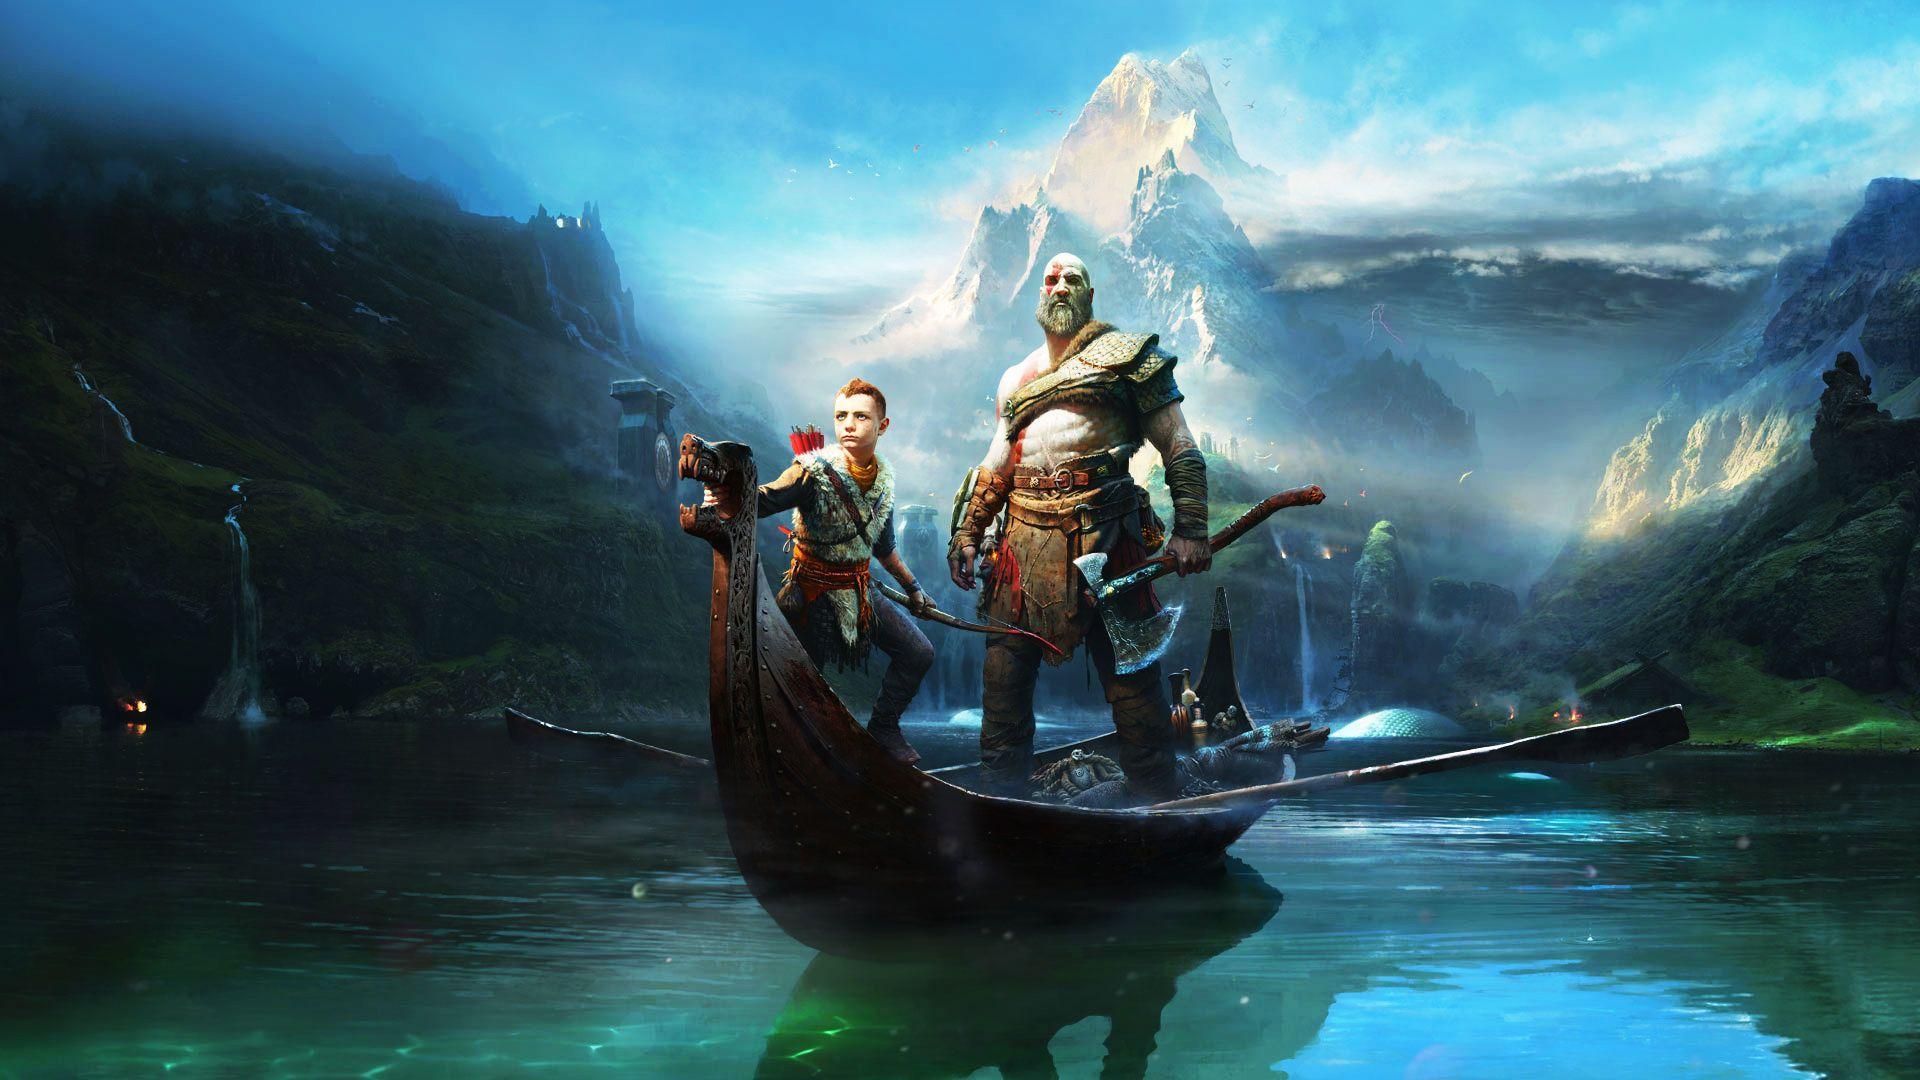 God of War PS4 Wallpapers - Top Free God of War PS4 Backgrounds ...